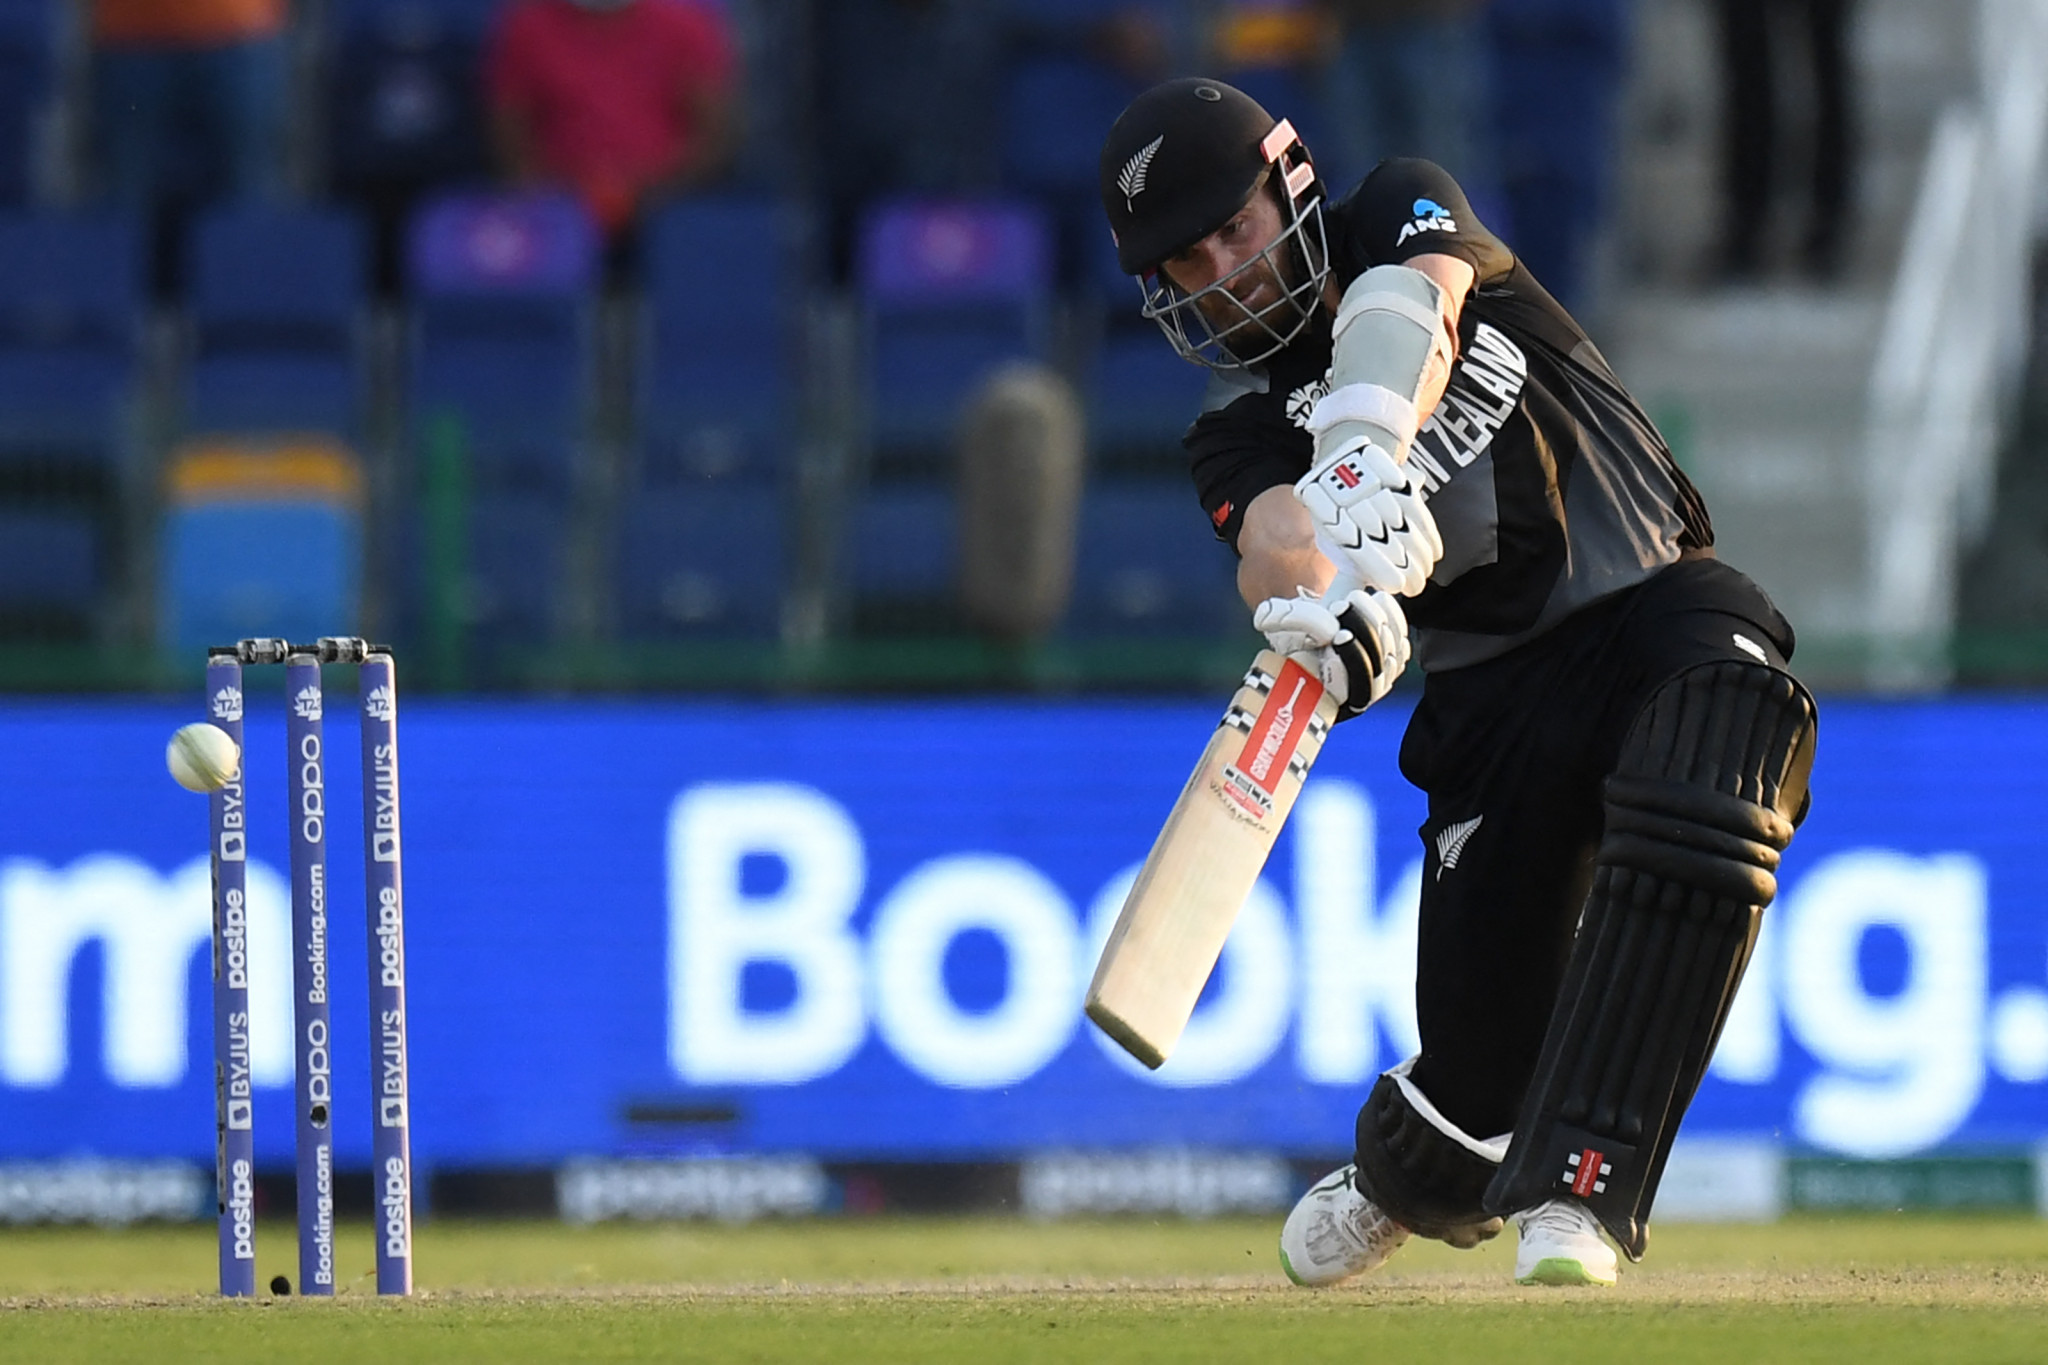 New Zealand beat Afghanistan to book place in Men’s T20 World Cup semi-finals